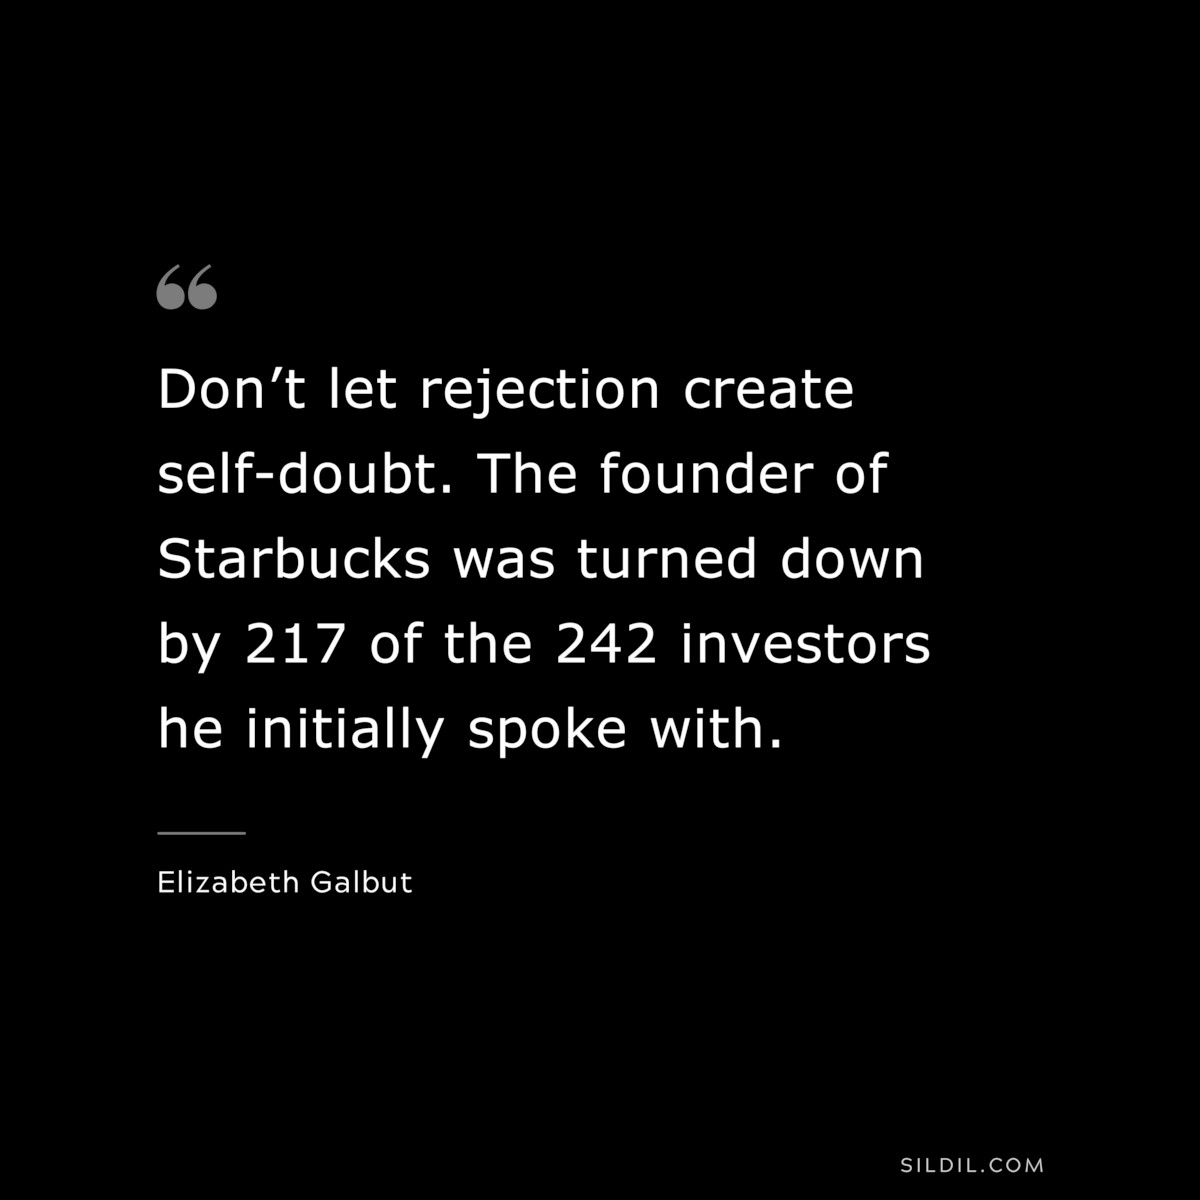 Don’t let rejection create self-doubt. The founder of Starbucks was turned down by 217 of the 242 investors he initially spoke with. ― Elizabeth Galbut